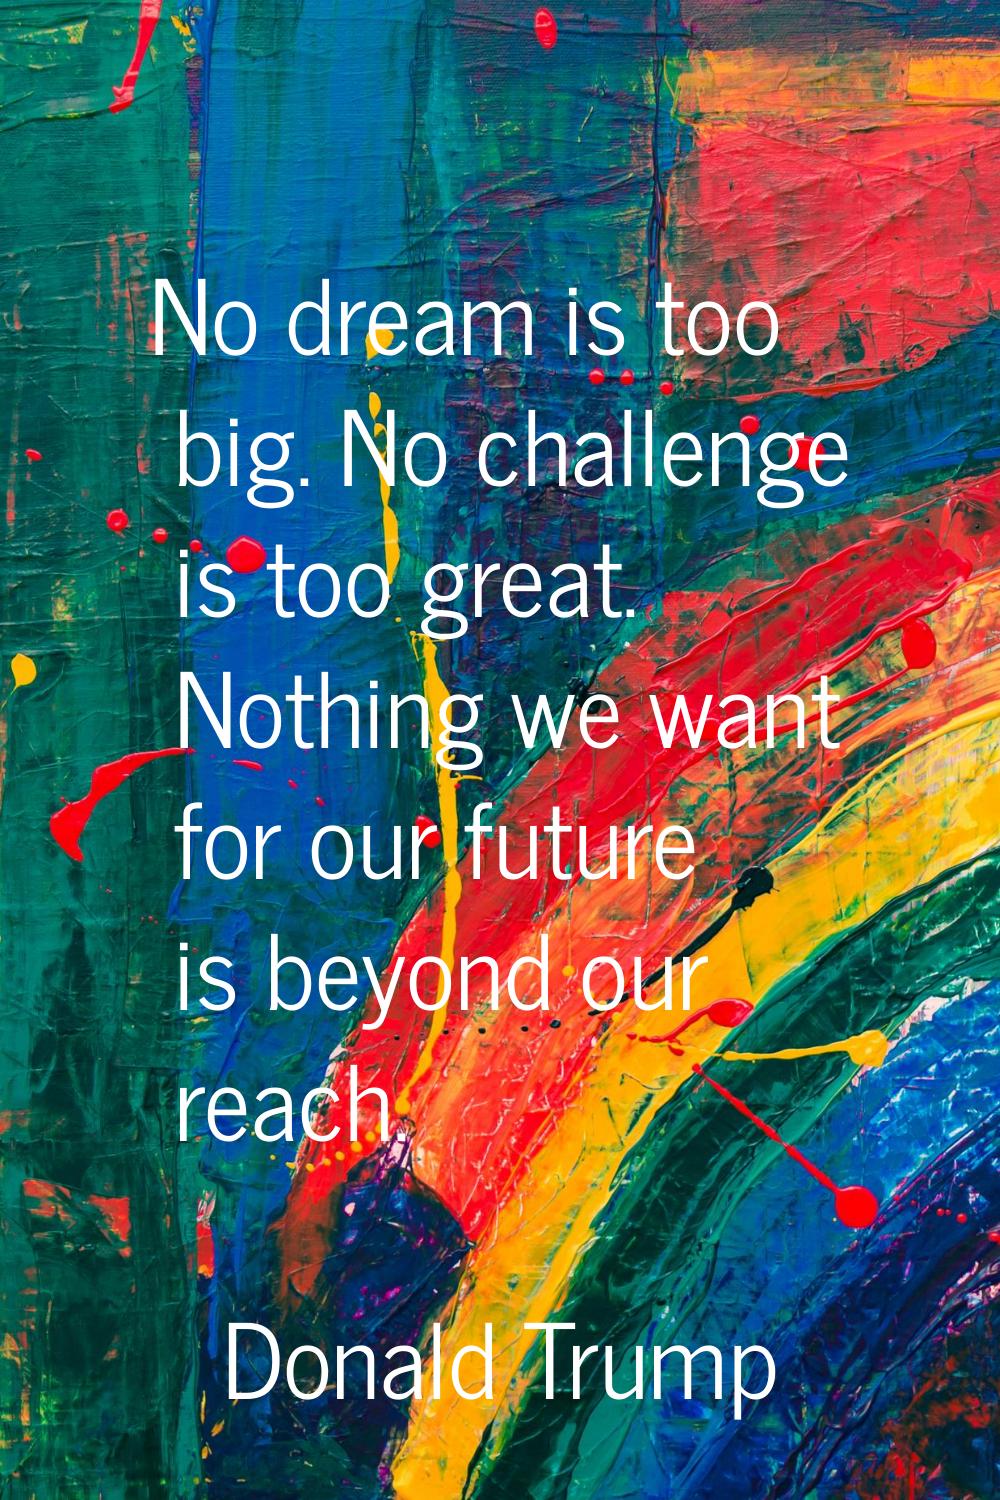 No dream is too big. No challenge is too great. Nothing we want for our future is beyond our reach.